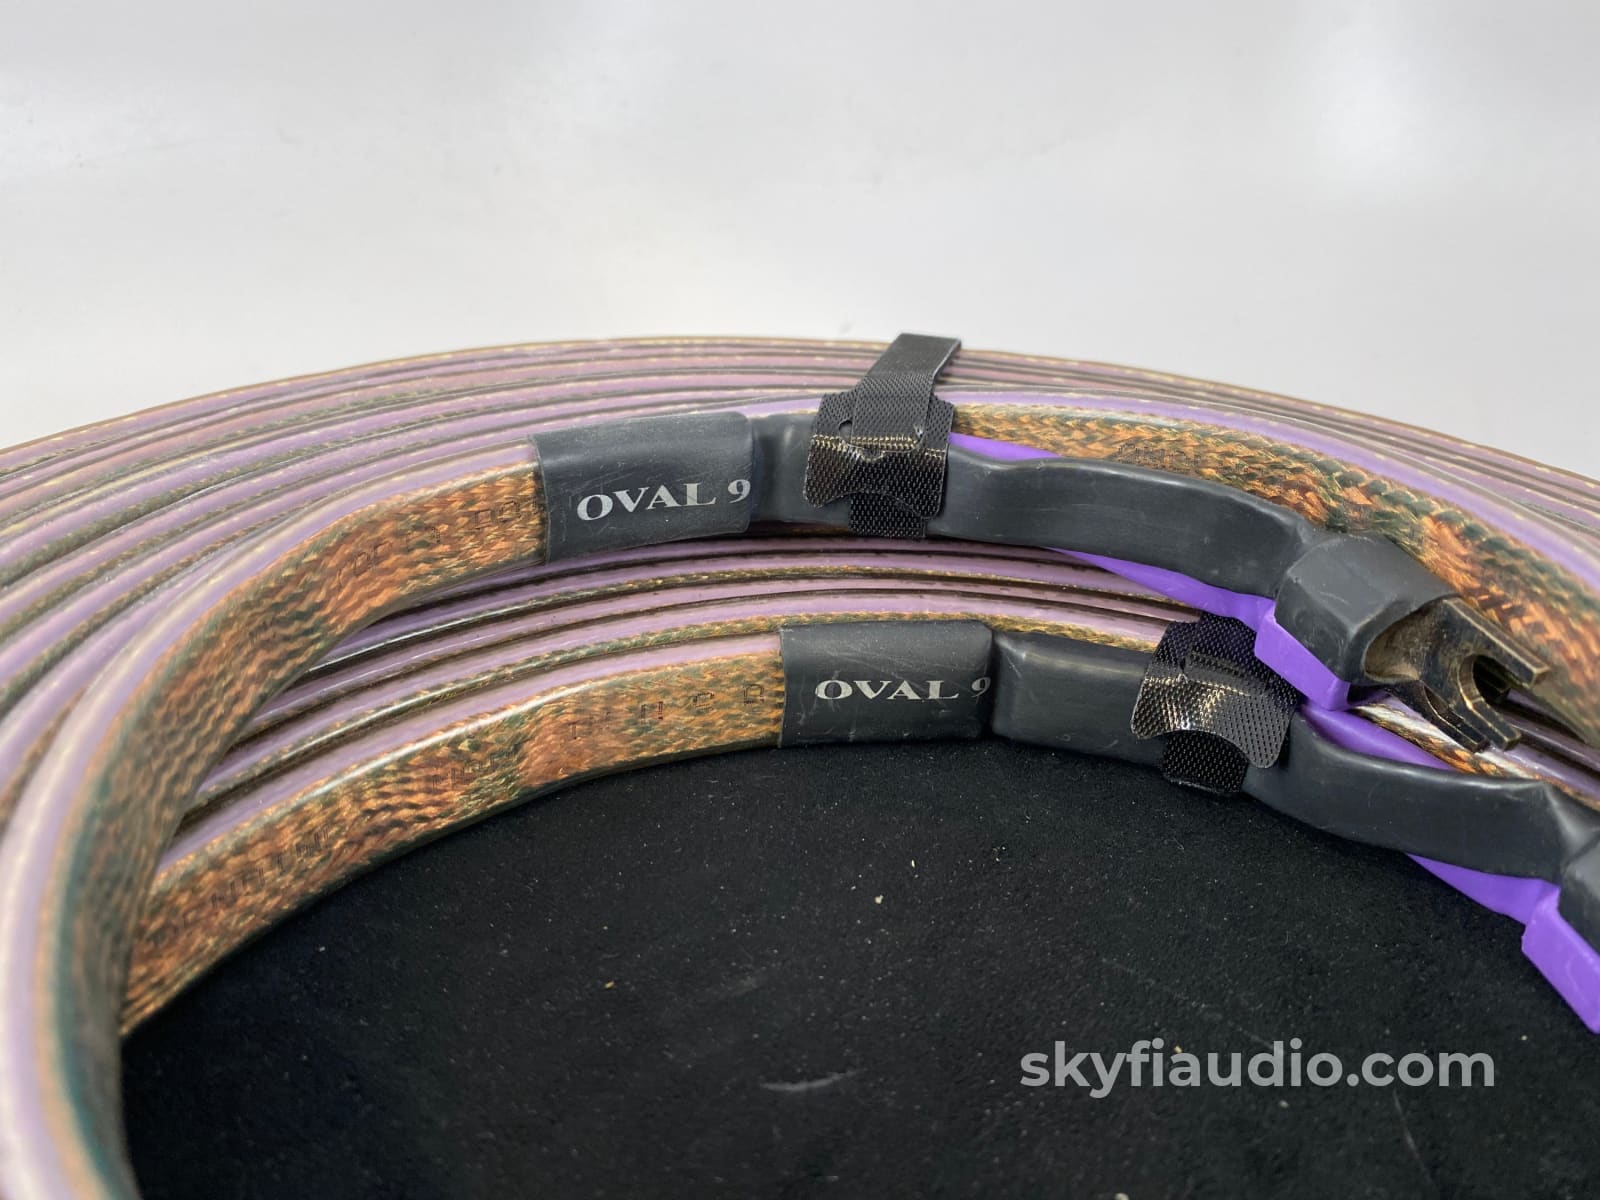 Analysis Plus - Oval 9 Speaker Cables 7M Length